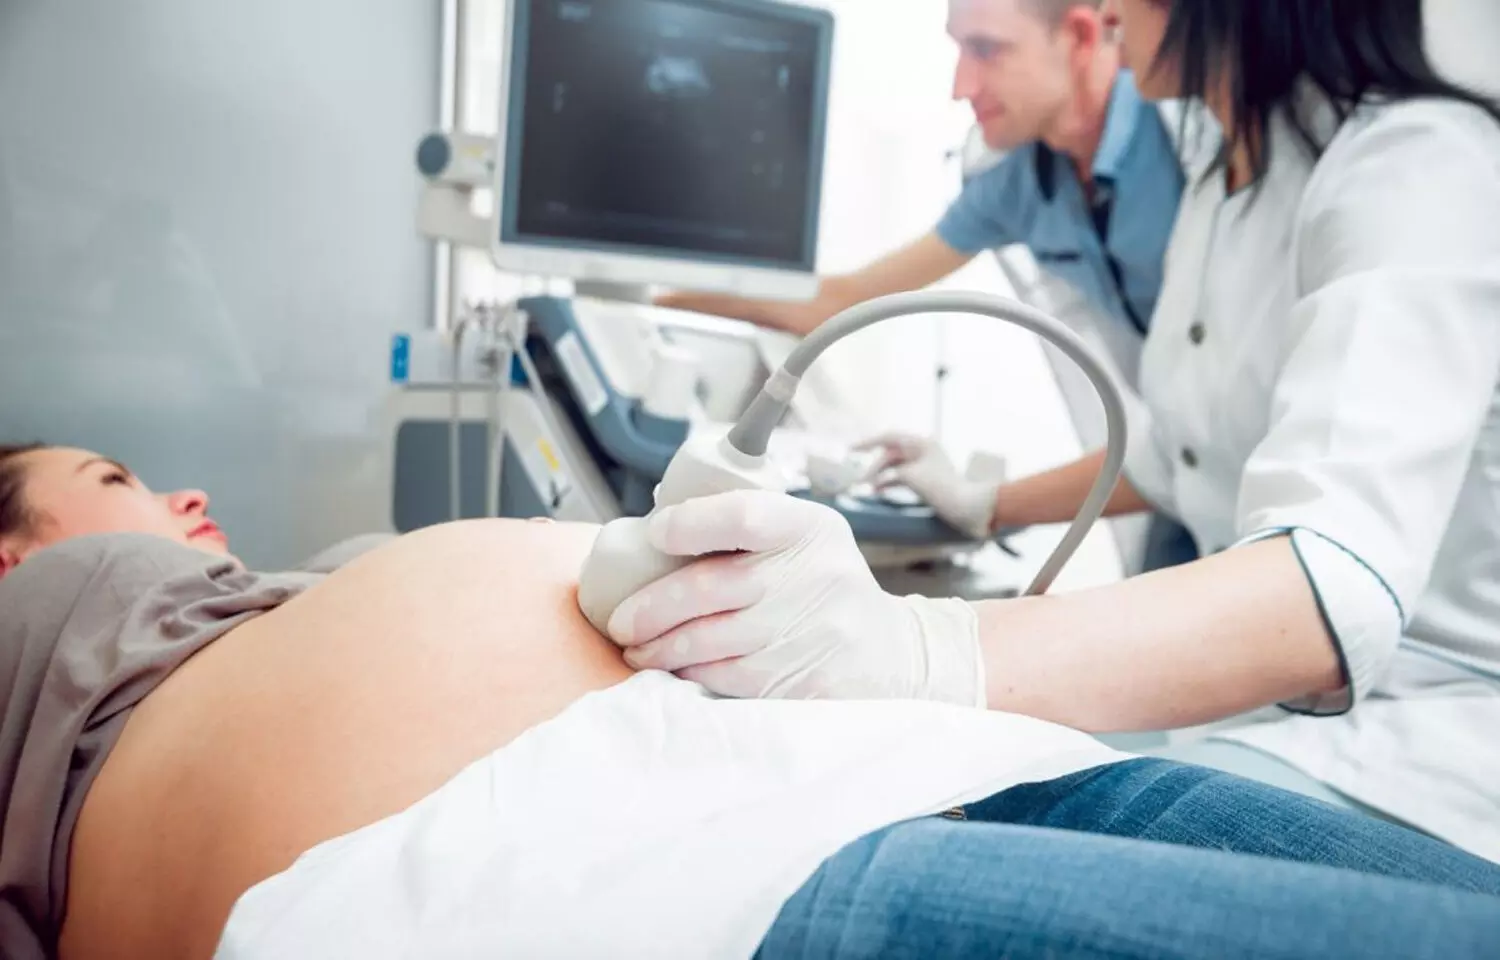 Fetal MRI can accurately detect posterior fossa anomalies: Study